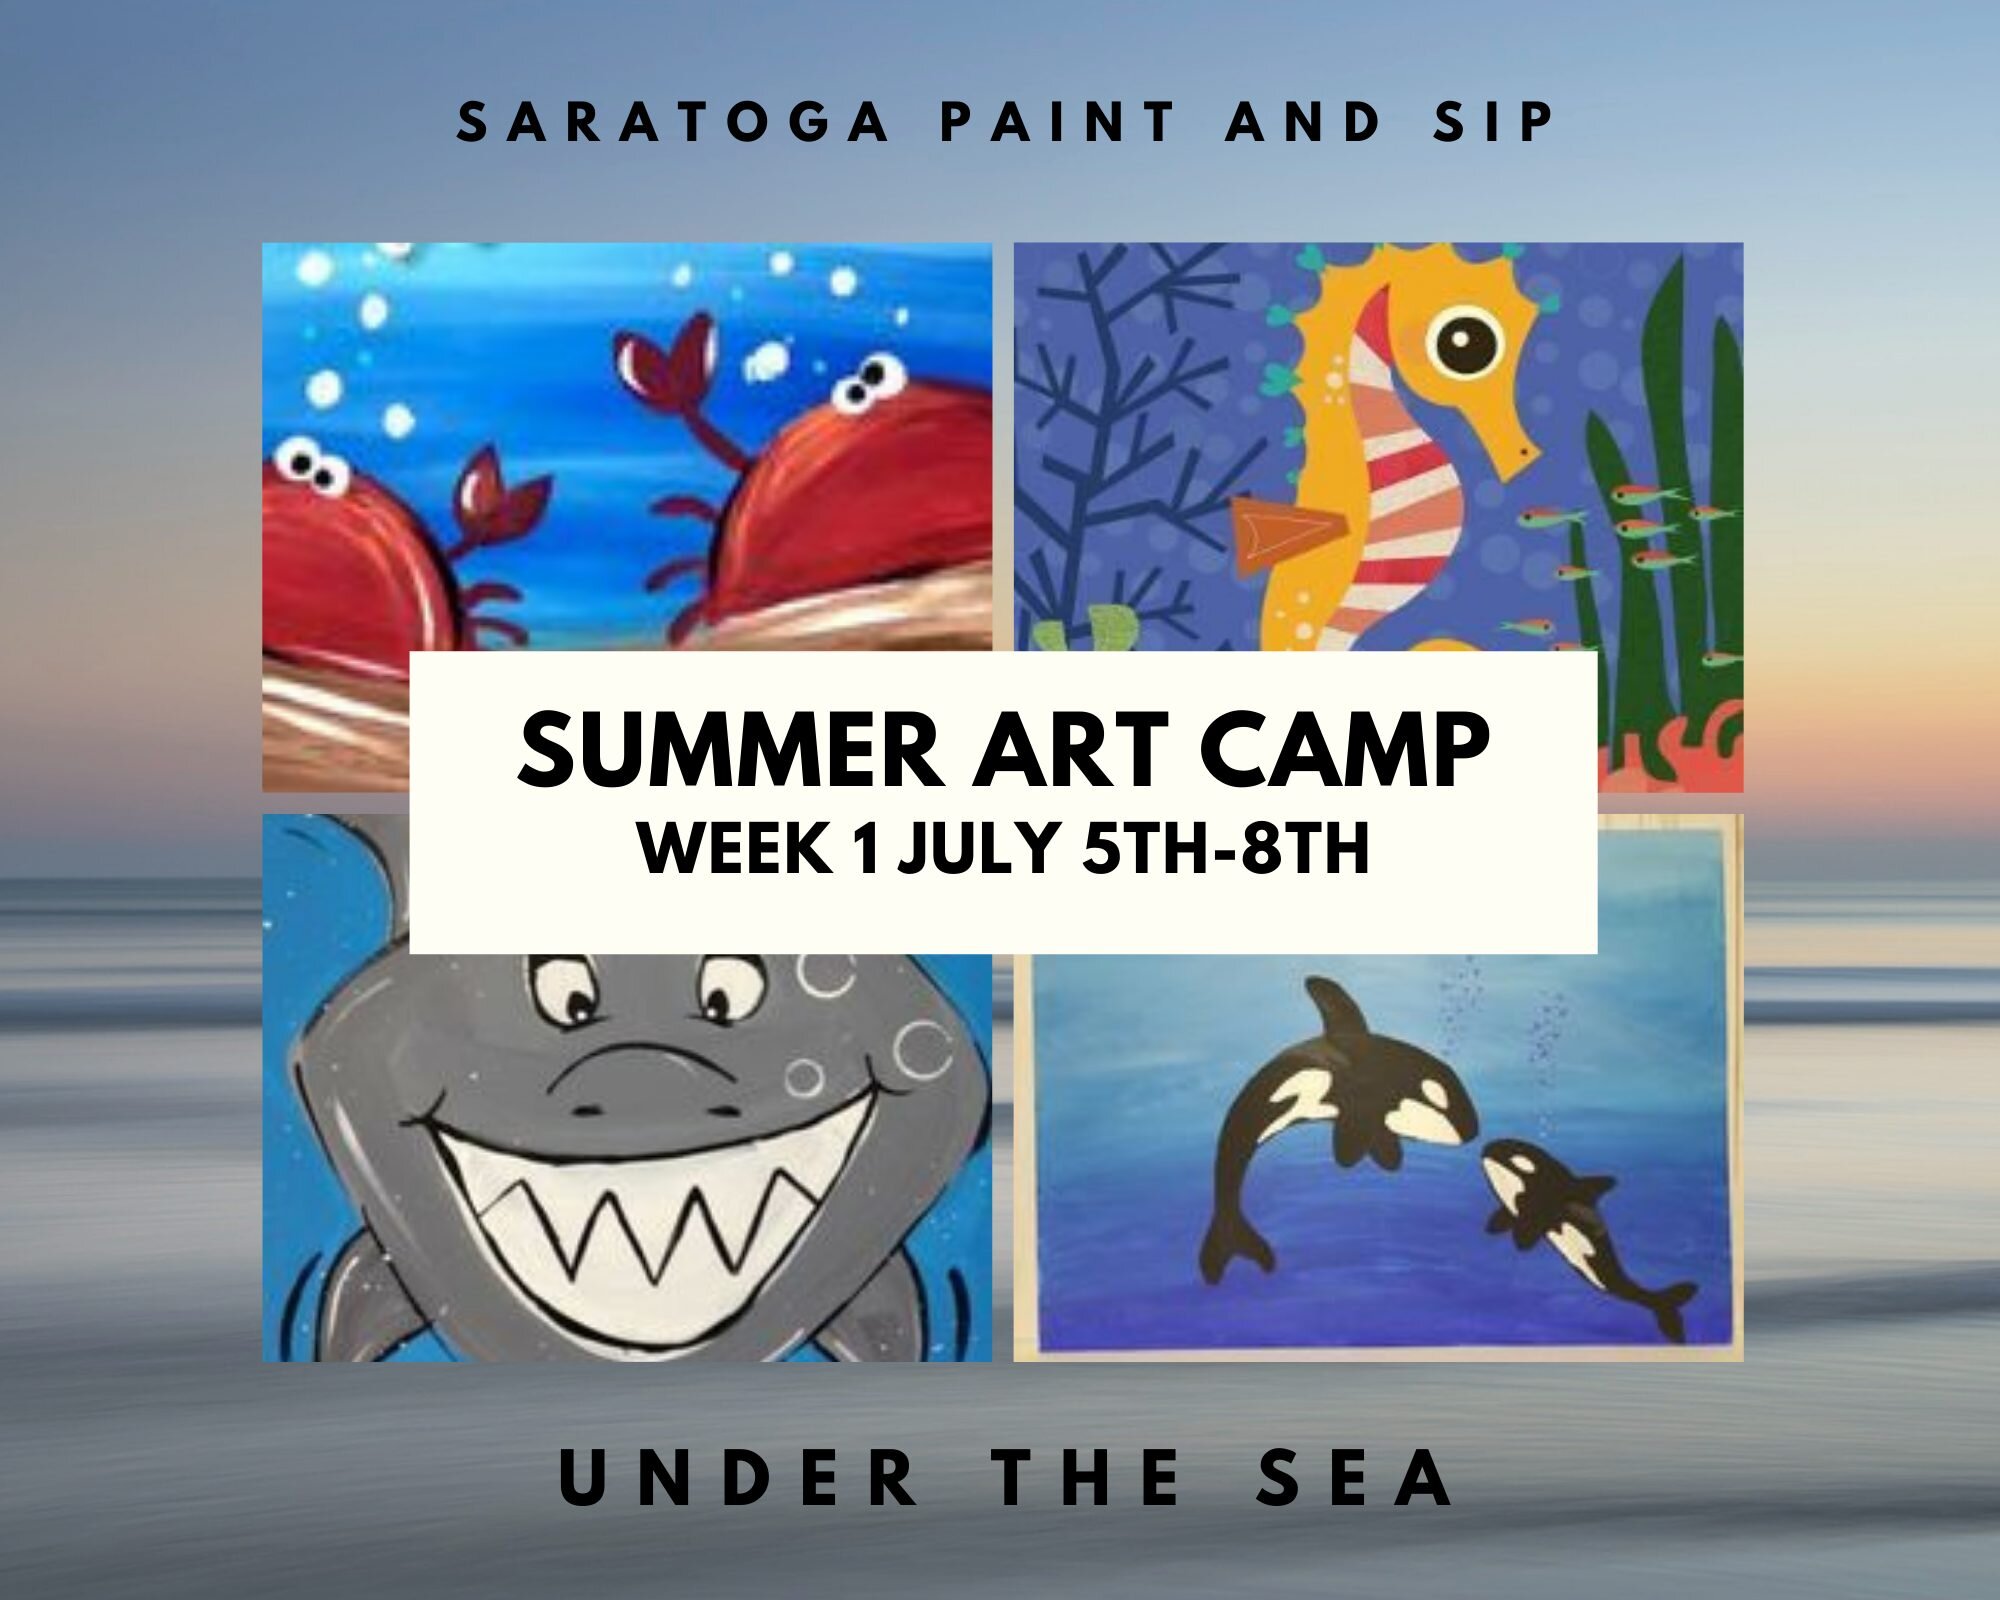 What is a Paint and Sip Studio? - Saratoga Paint and Sip Studio